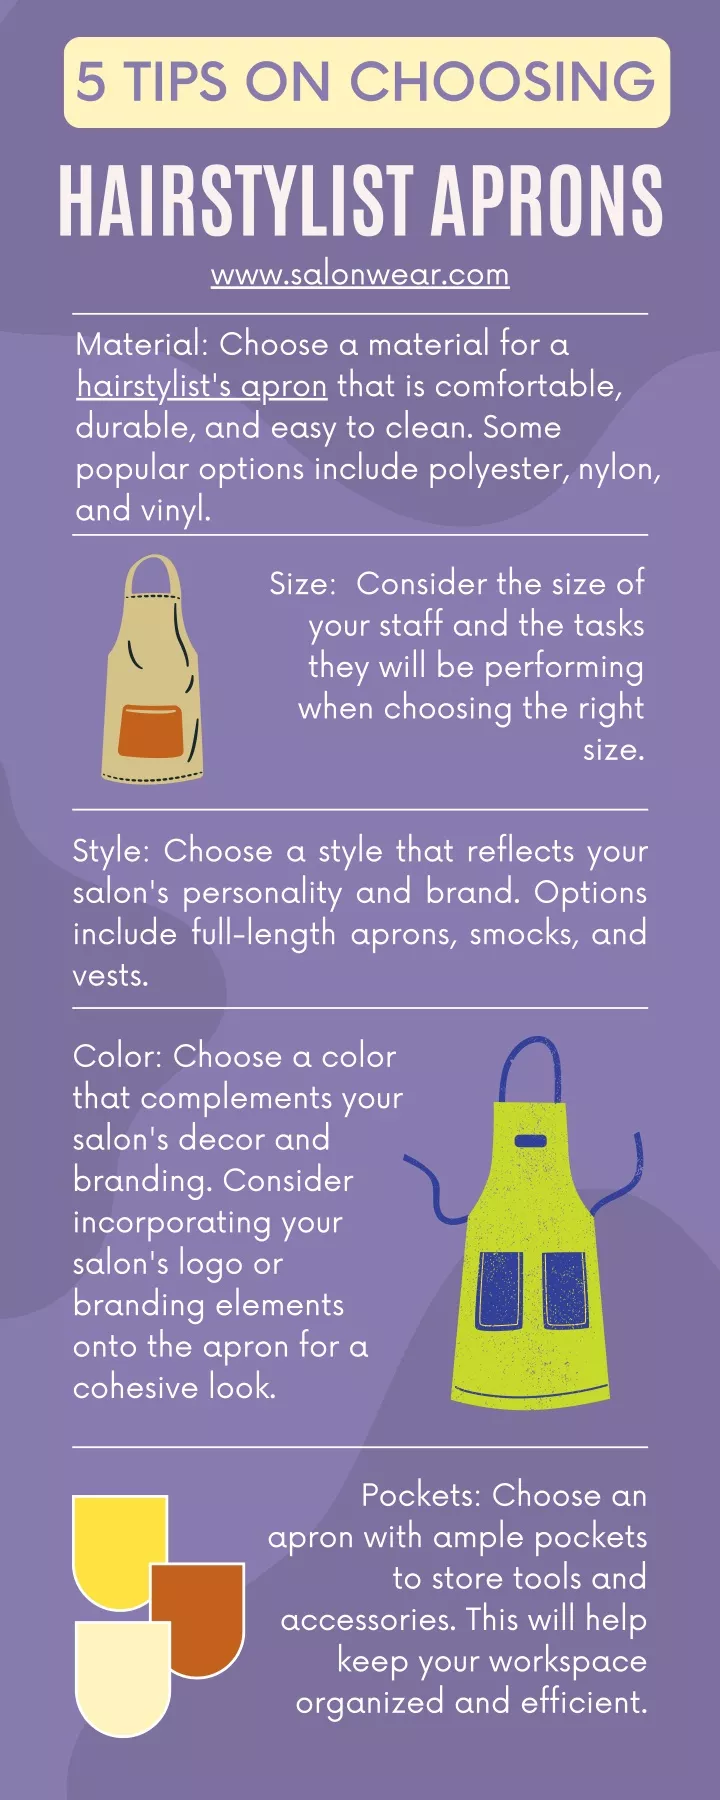 5 tips on choosing hairstylist aprons